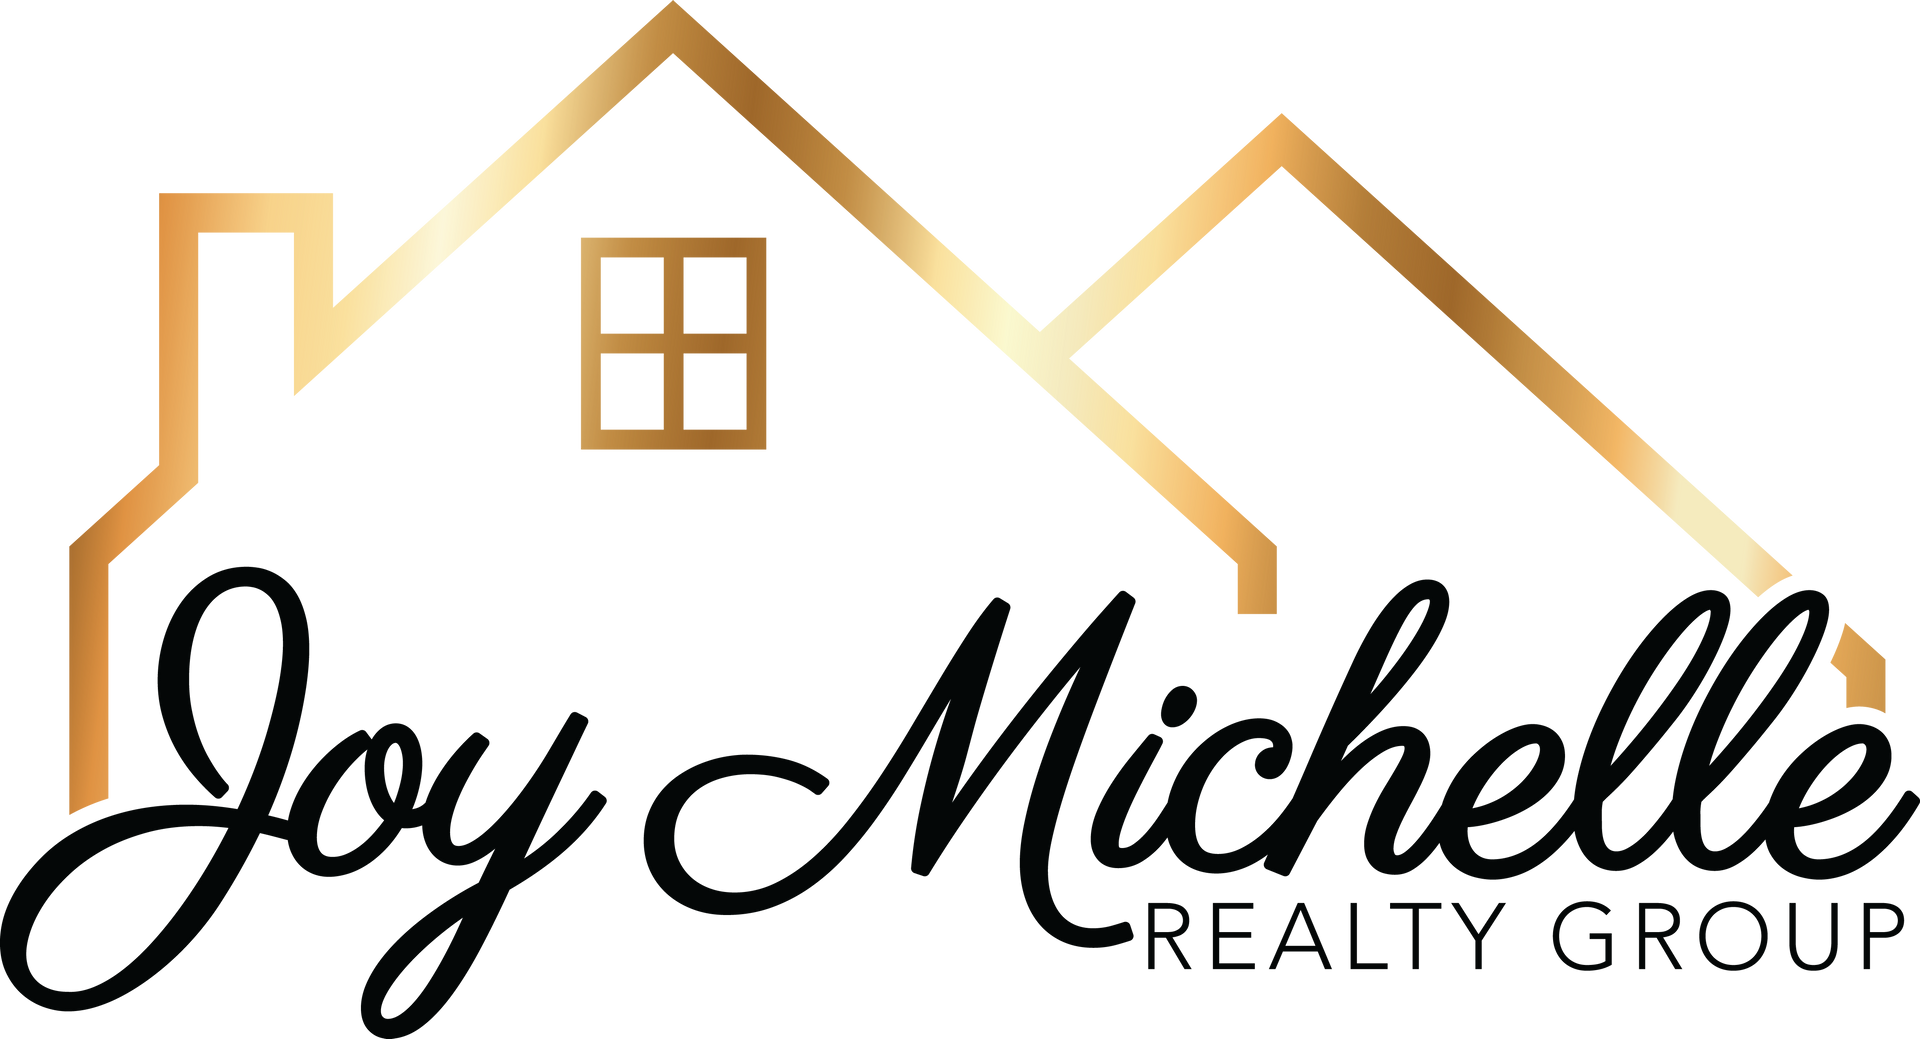 The logo for joy michelle realty group shows a house with a window.